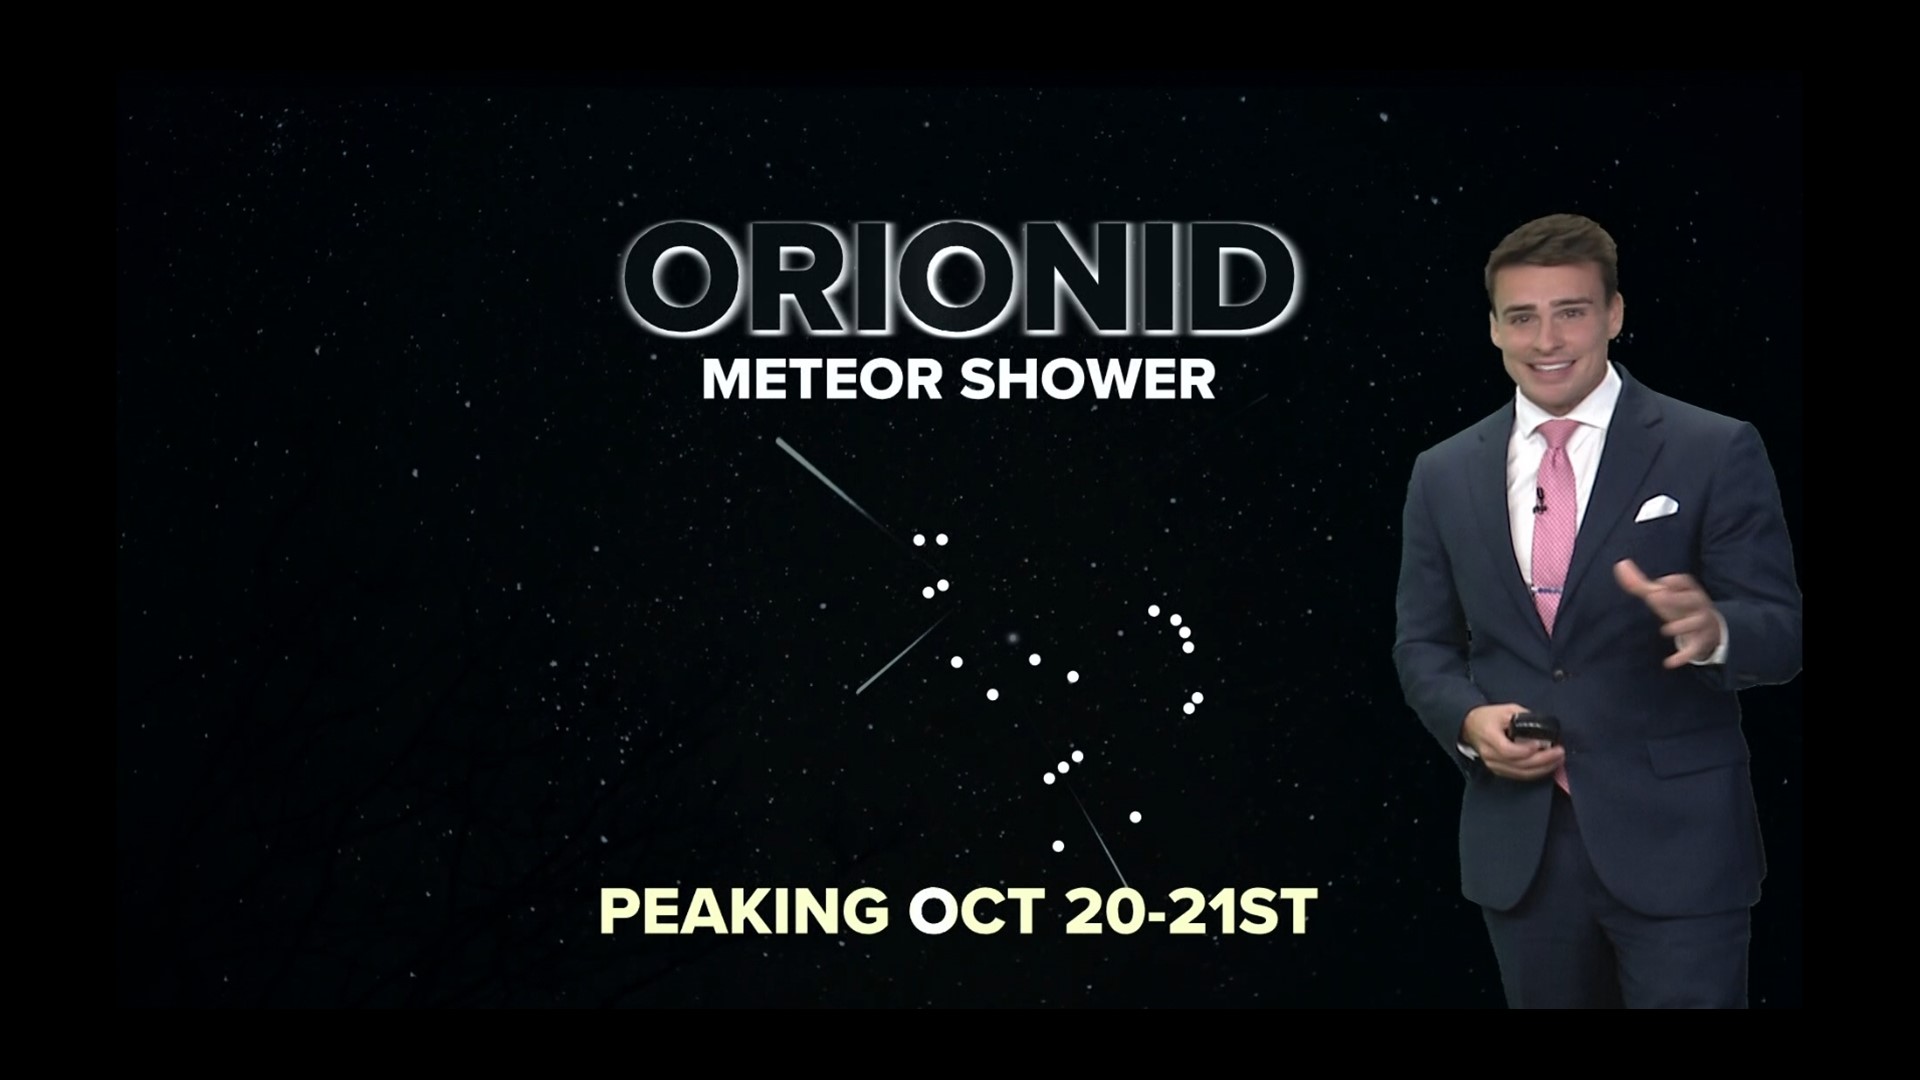 The Orionid meteor shower peaks Thursday and Friday nights. Expect to see shootings stars near the constellation Orion.